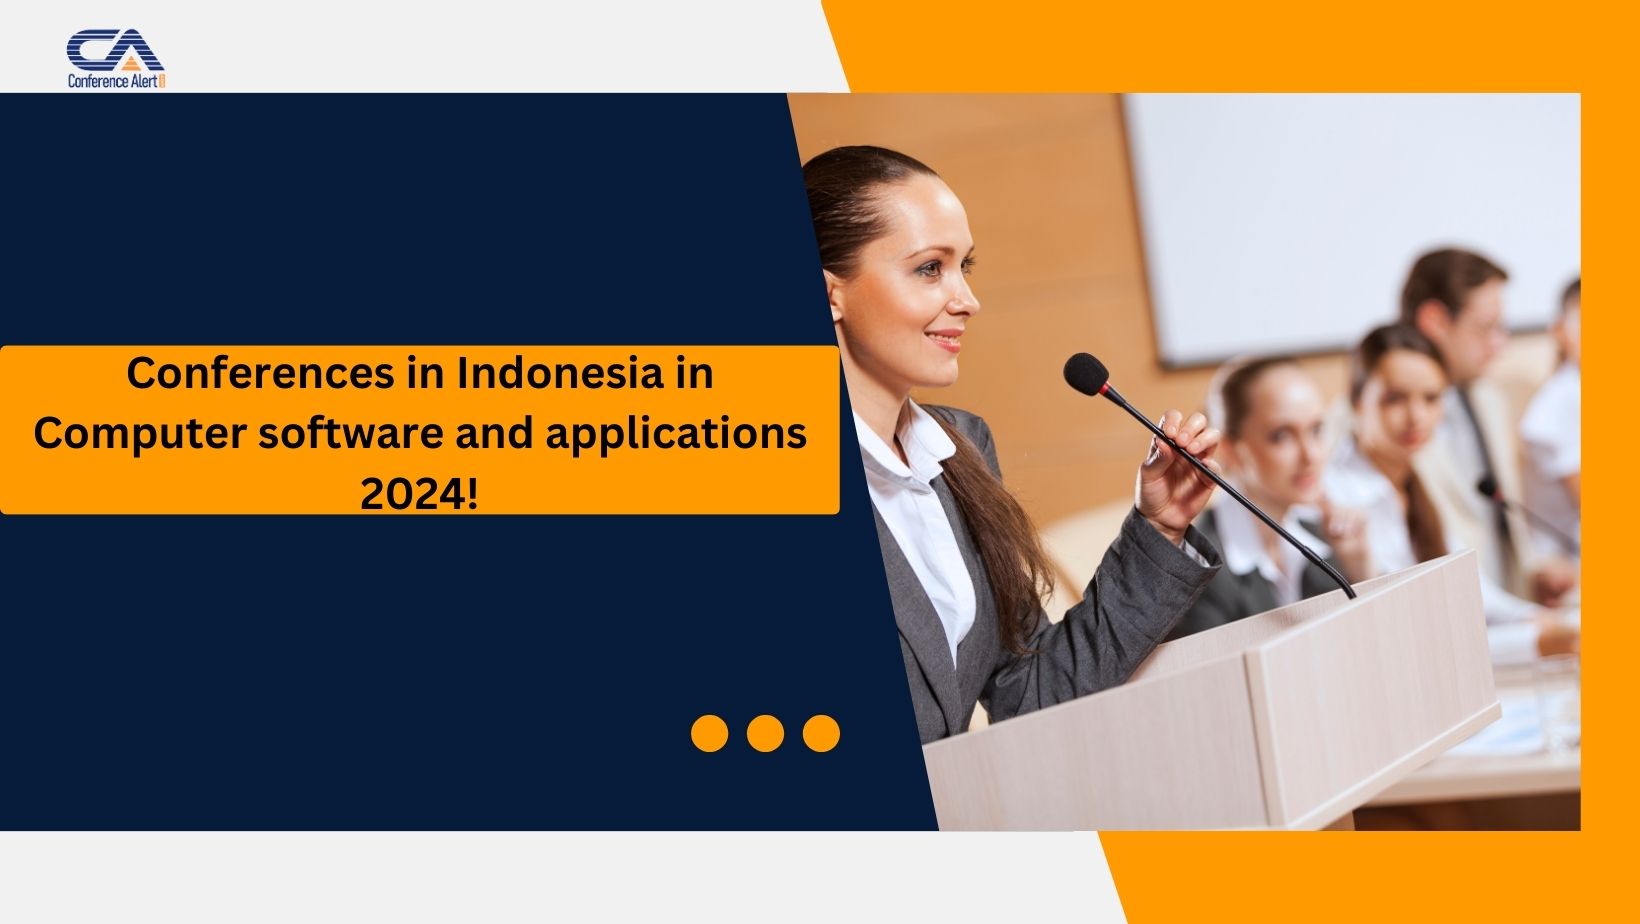 Conferences in Indonesia in Computer software and applications